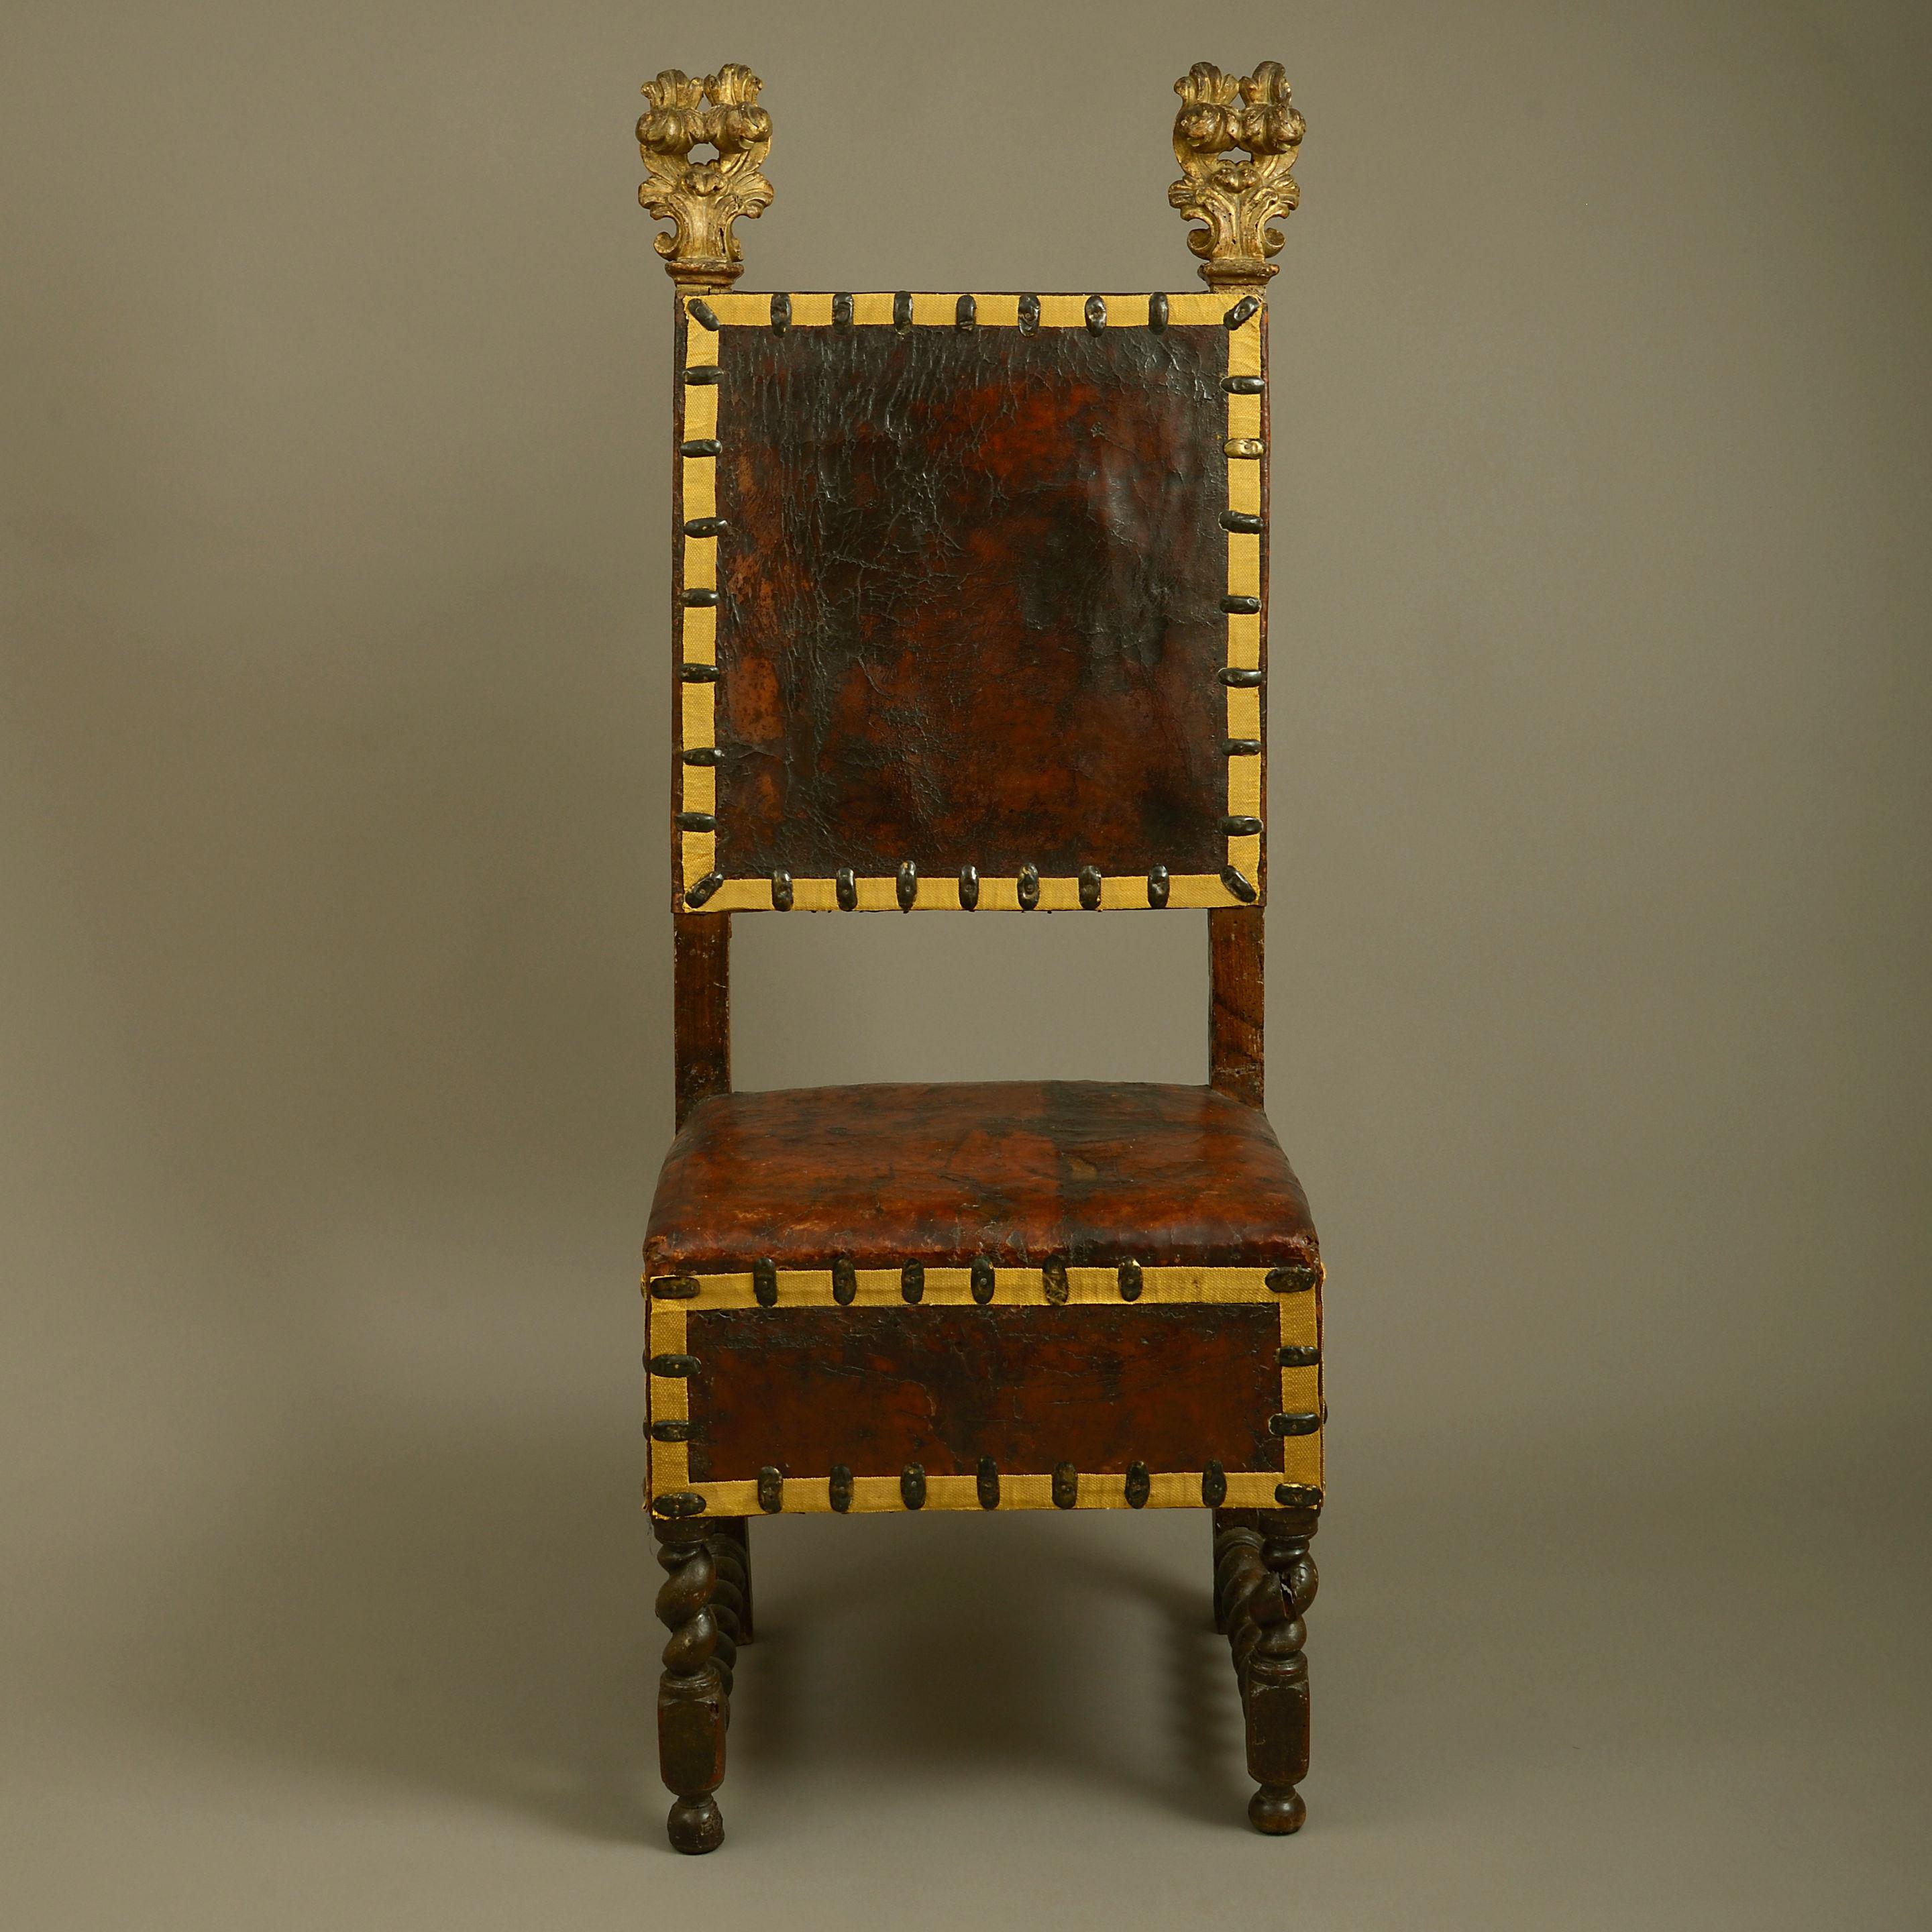 A rare mid-17th century Florentine walnut chair, of walnut, having gilded foliate finials and, retaining the original leather upholstery and raised on turned barley twist legs and side stretchers.